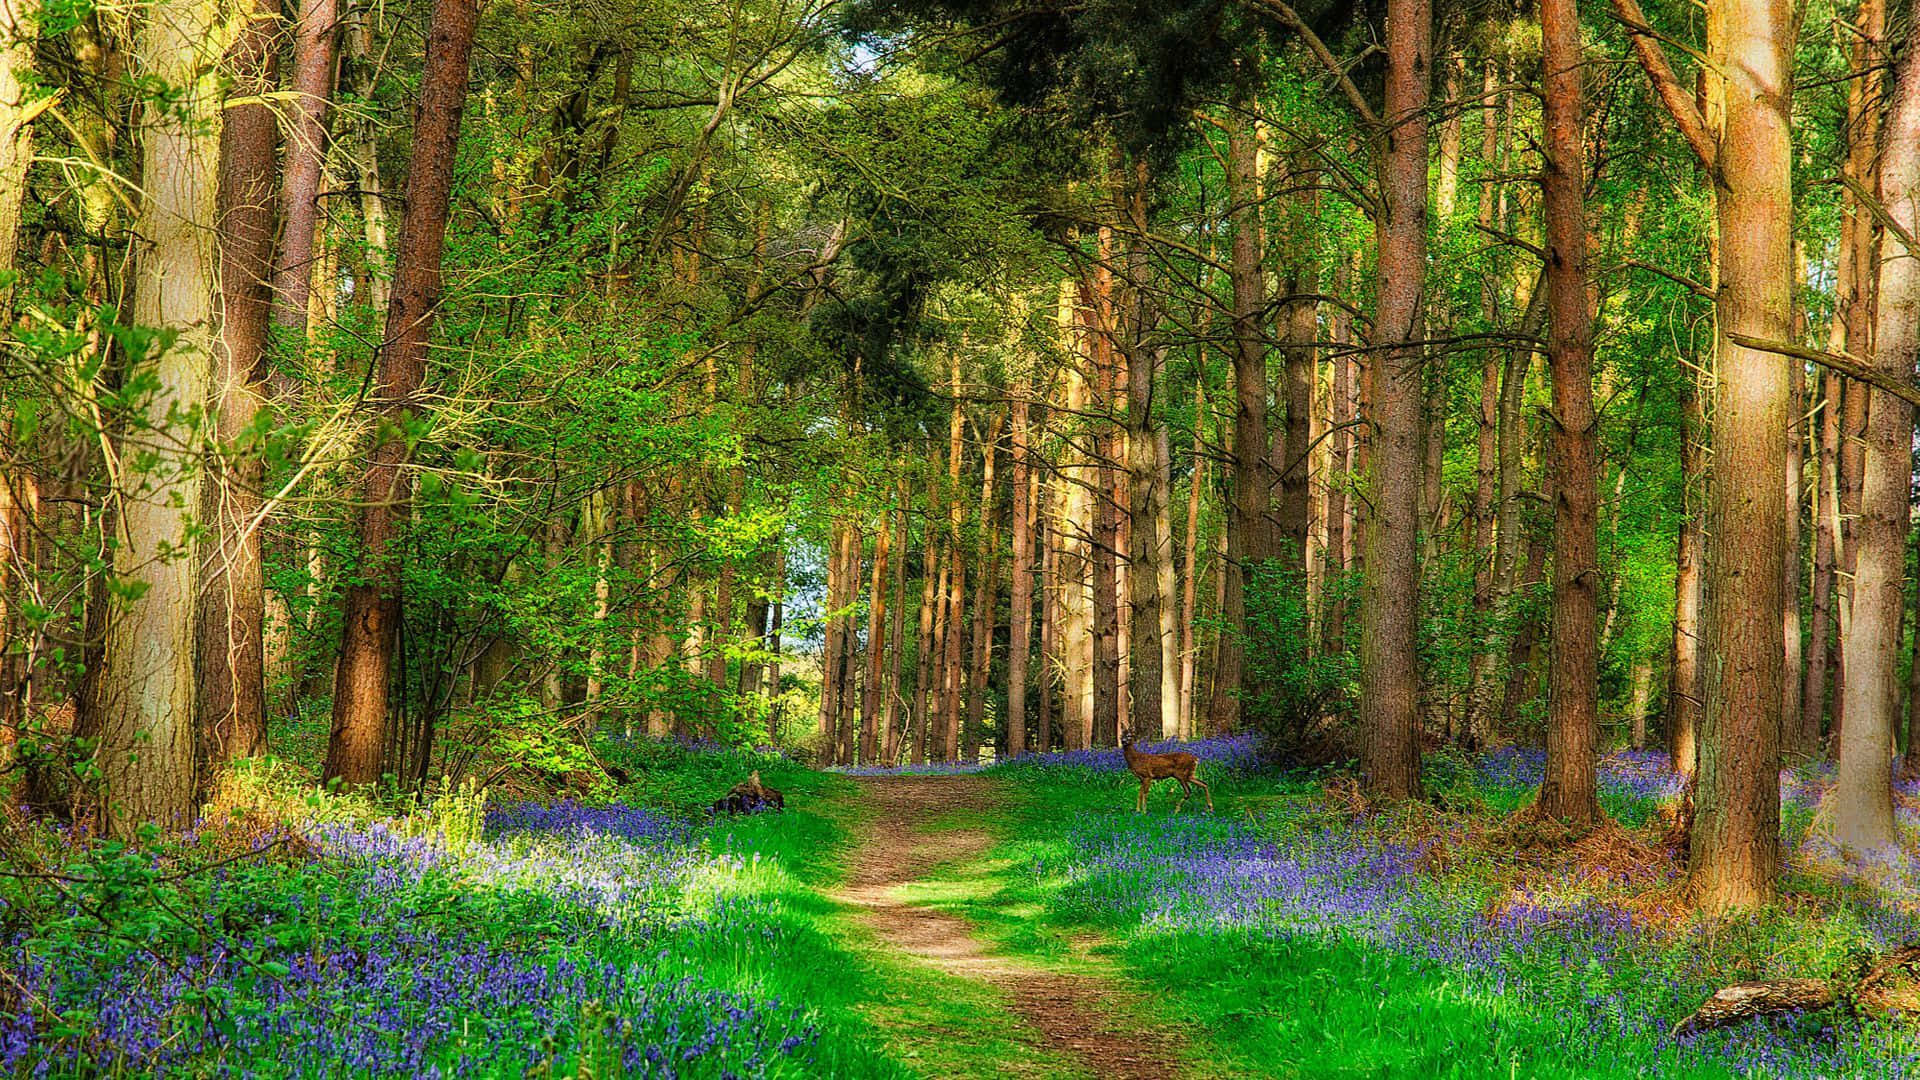 Enchanting Pathway in a Beautiful Forest Wallpaper